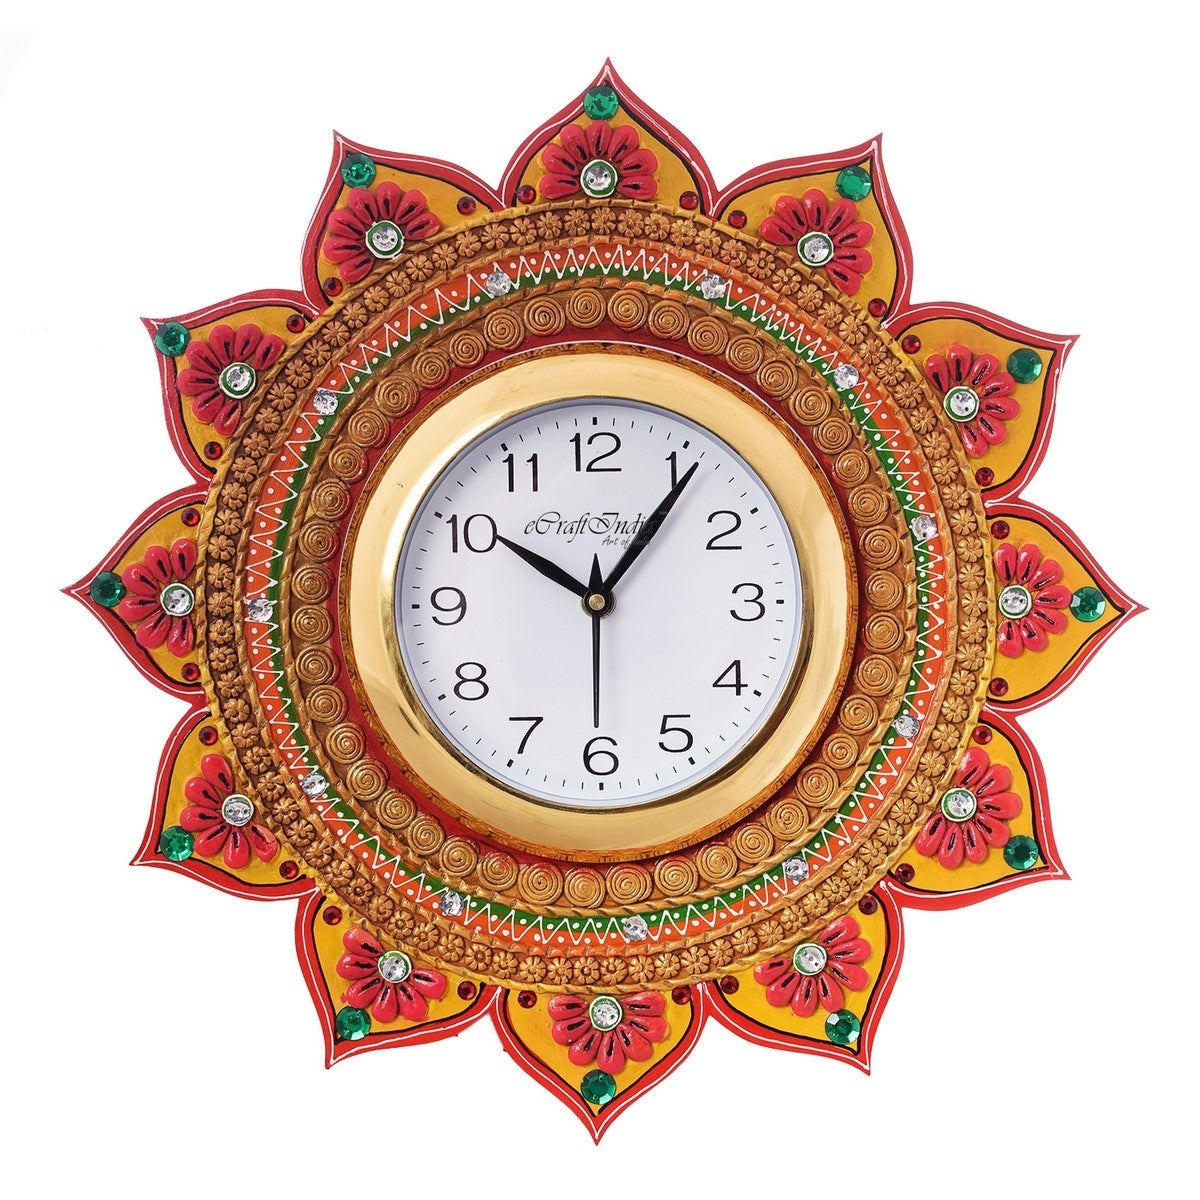 Royal and Elegant Handcrafted Flower Design Papier Mache Wooden Decorative Wall Clock